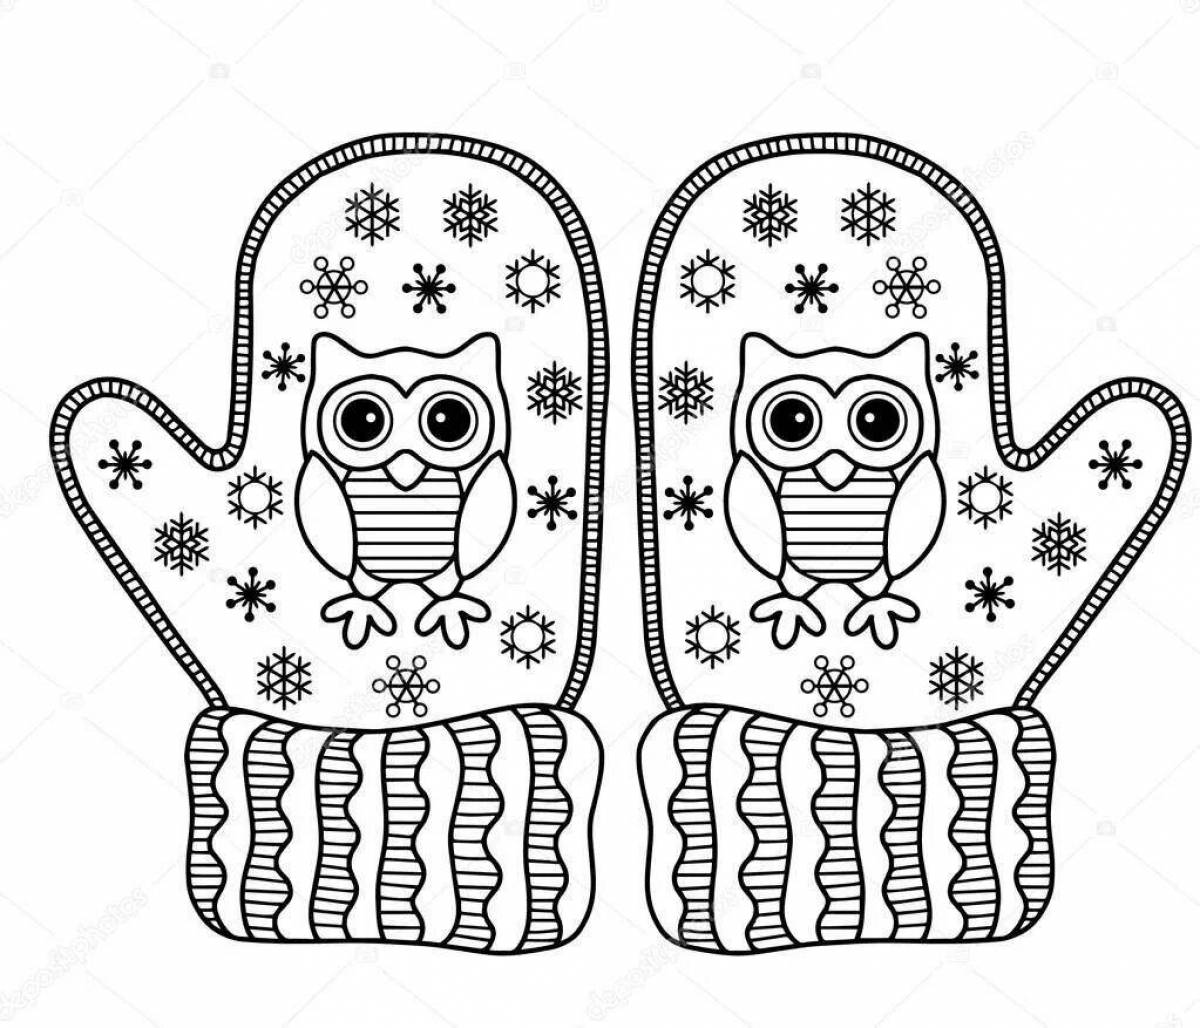 Sparkling Mitten Coloring Page for Students